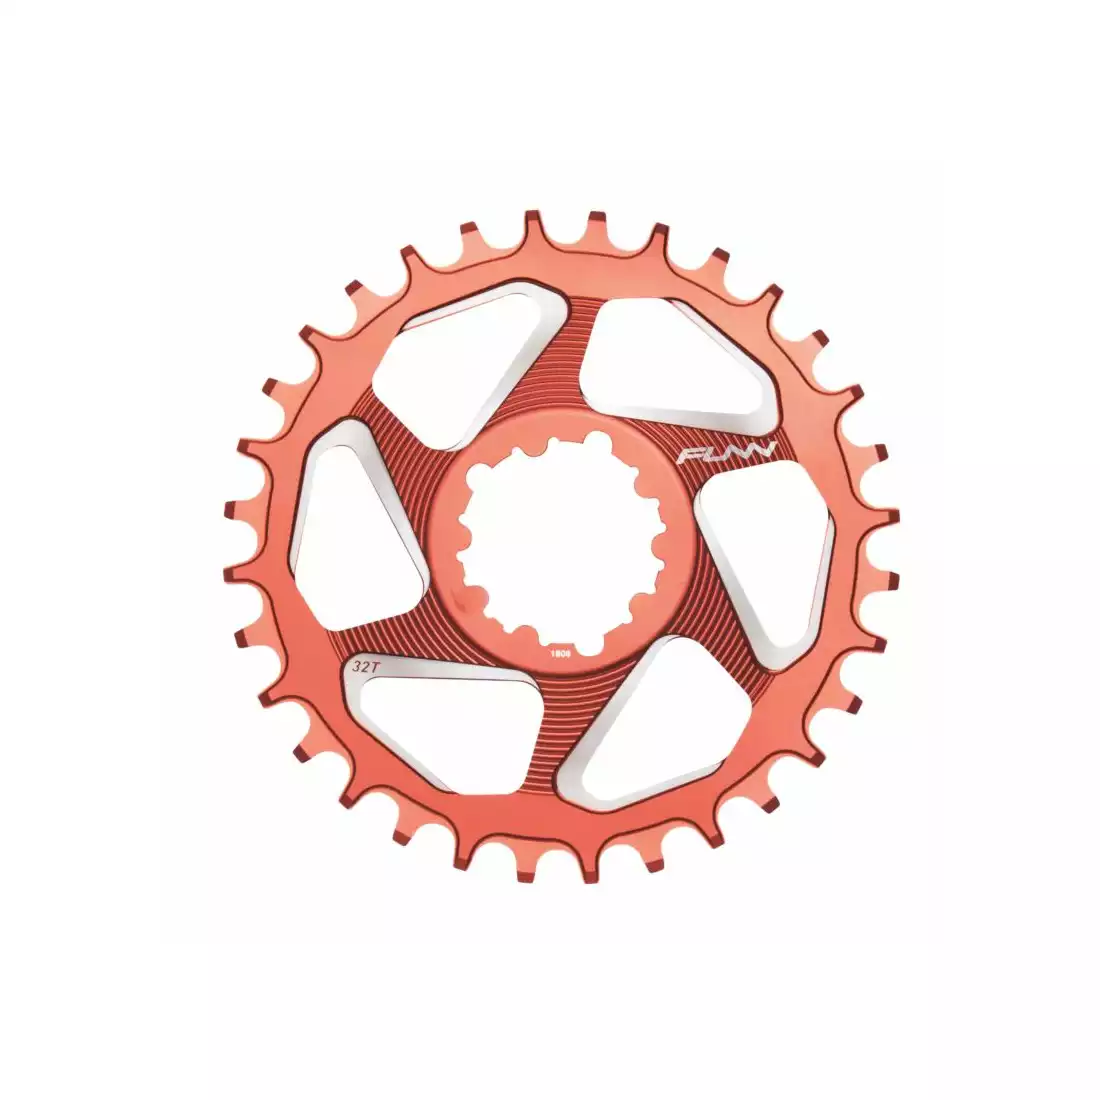 FUNN SOLO DX 32T NARROW- WIDE bicycle sprocket to crank red